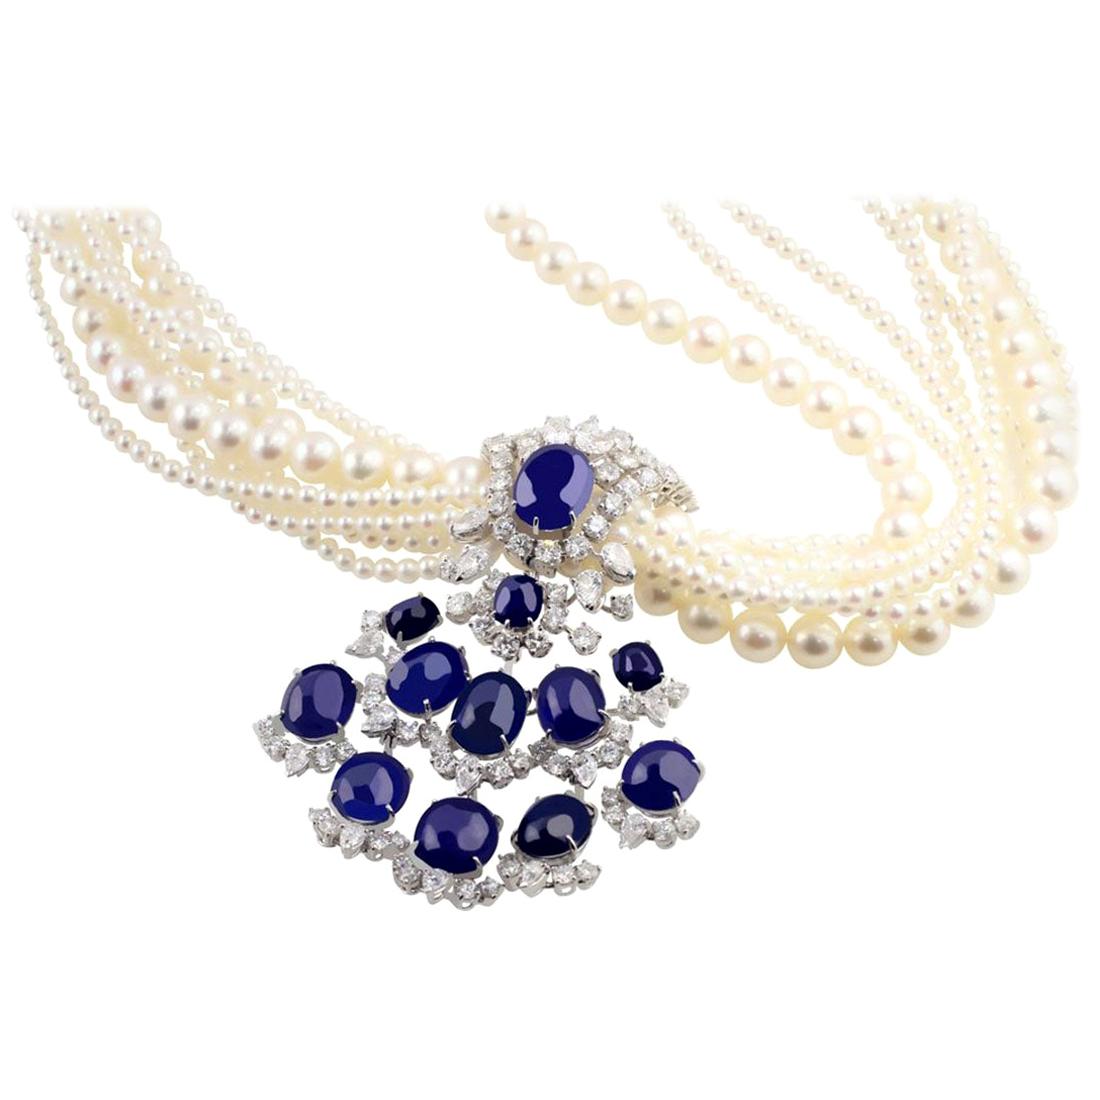 1950s 74.77 Carat Natural Unheated Burma Sapphire and Pearl Necklace For Sale